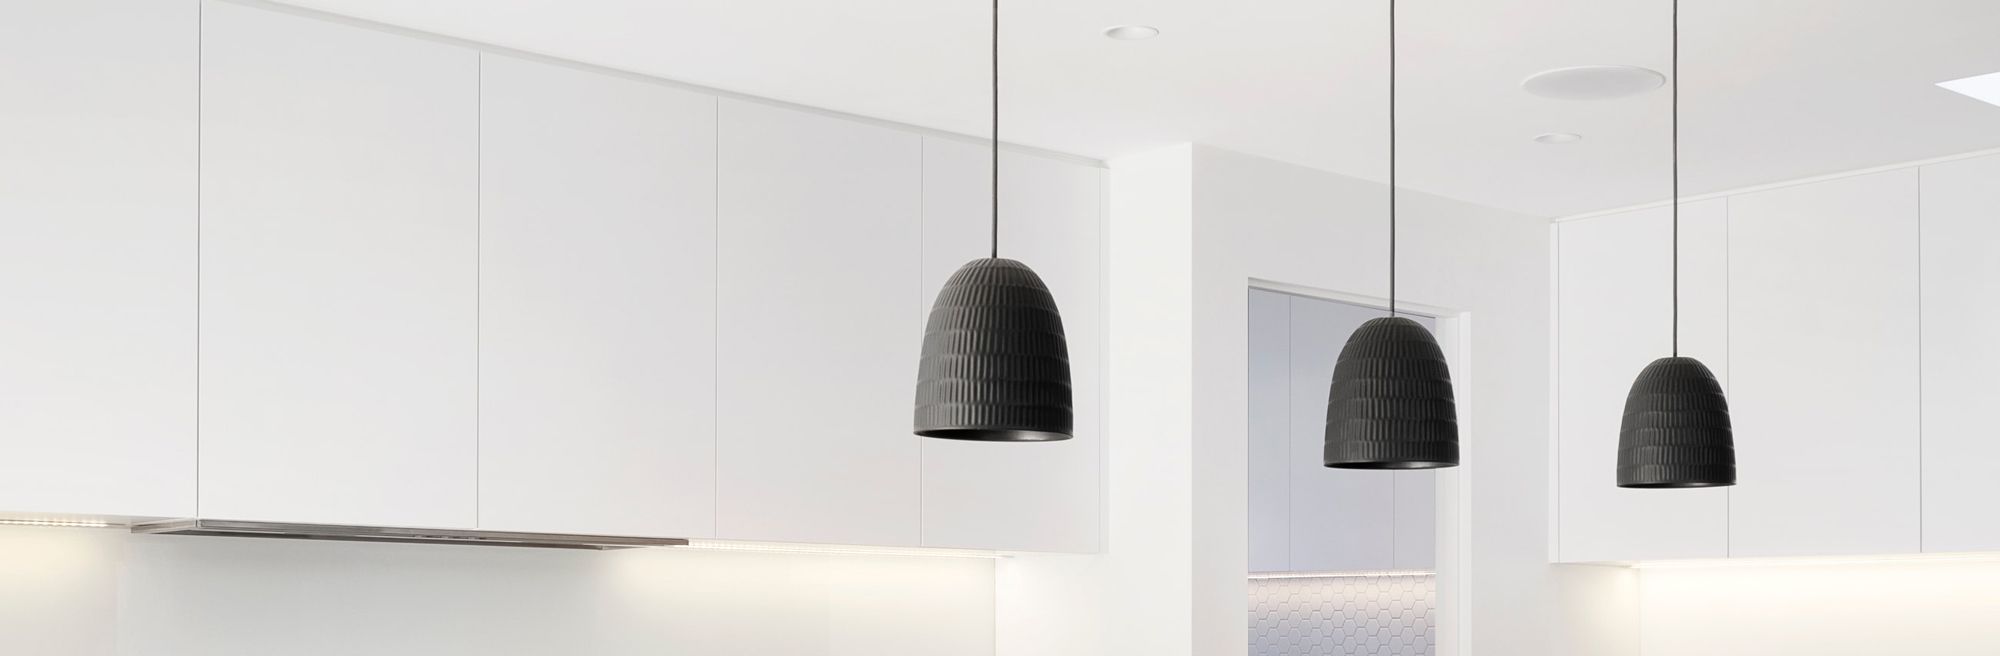 Pendants in a row in a white kitchen